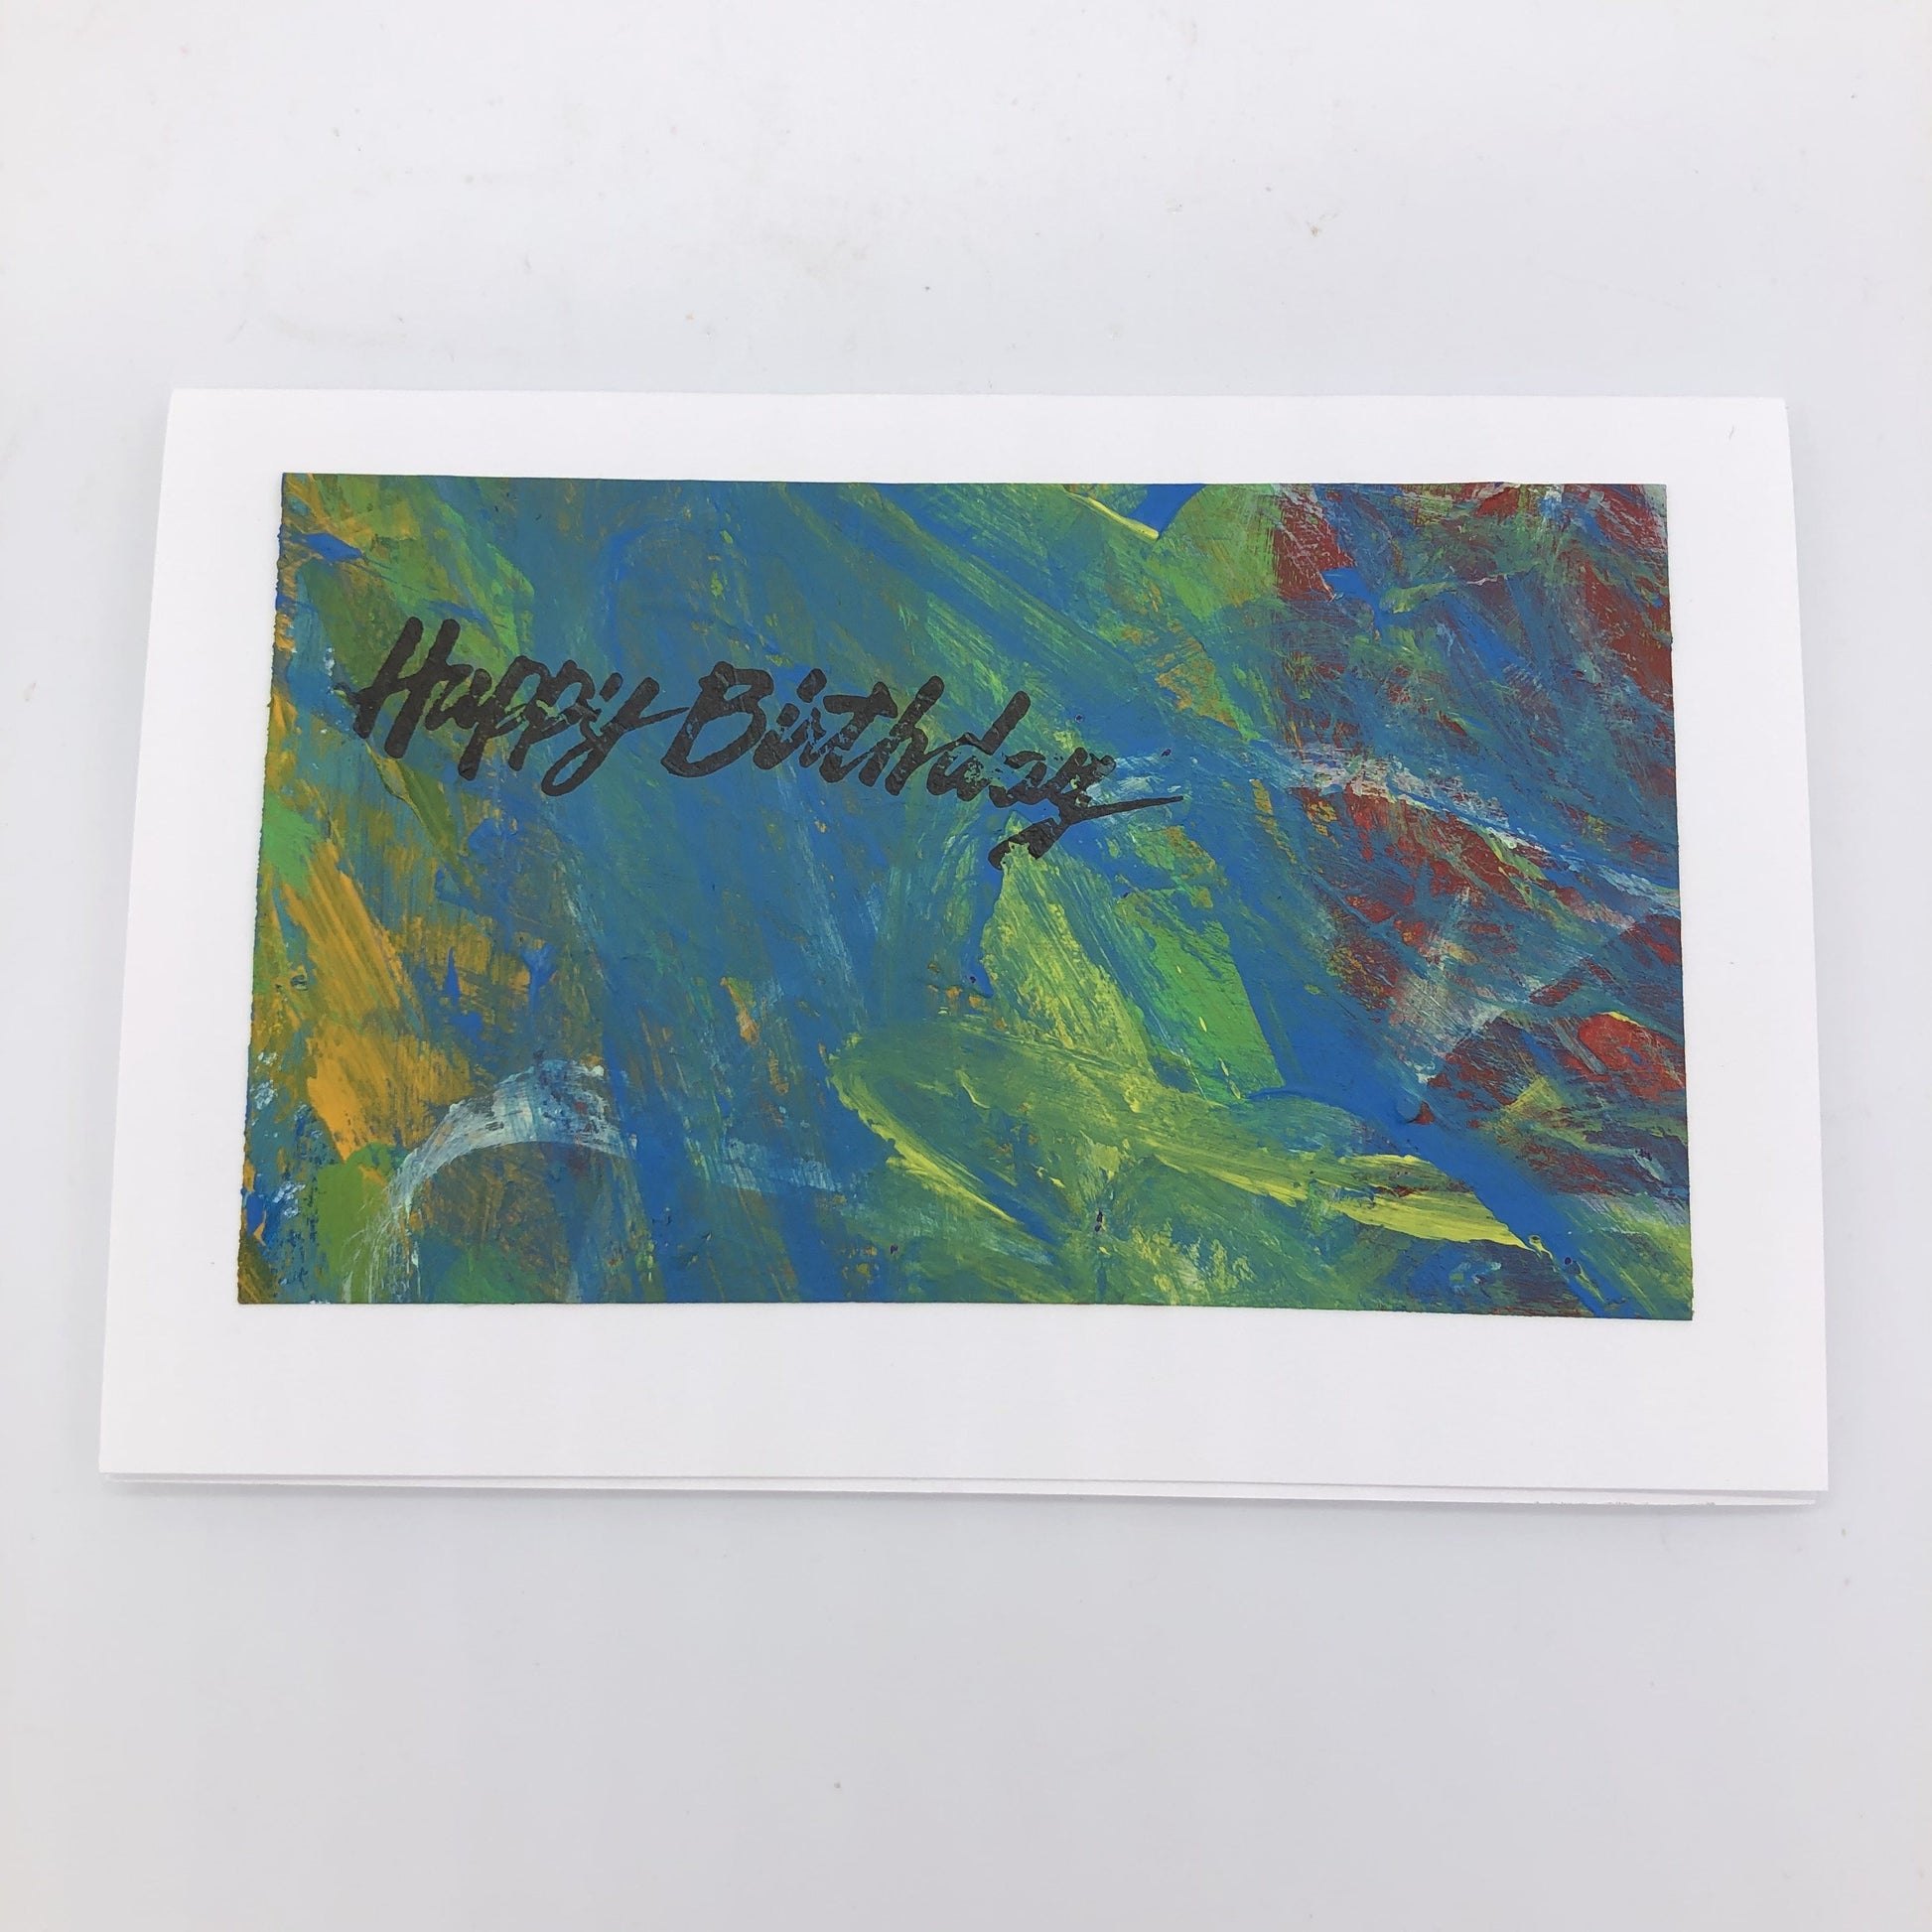 Handpainted acrylic background in mostly in bright blue, yellow a little red and some white.  On top of it in the upper left hand corner in a script font it says Happy Birthday in black type.